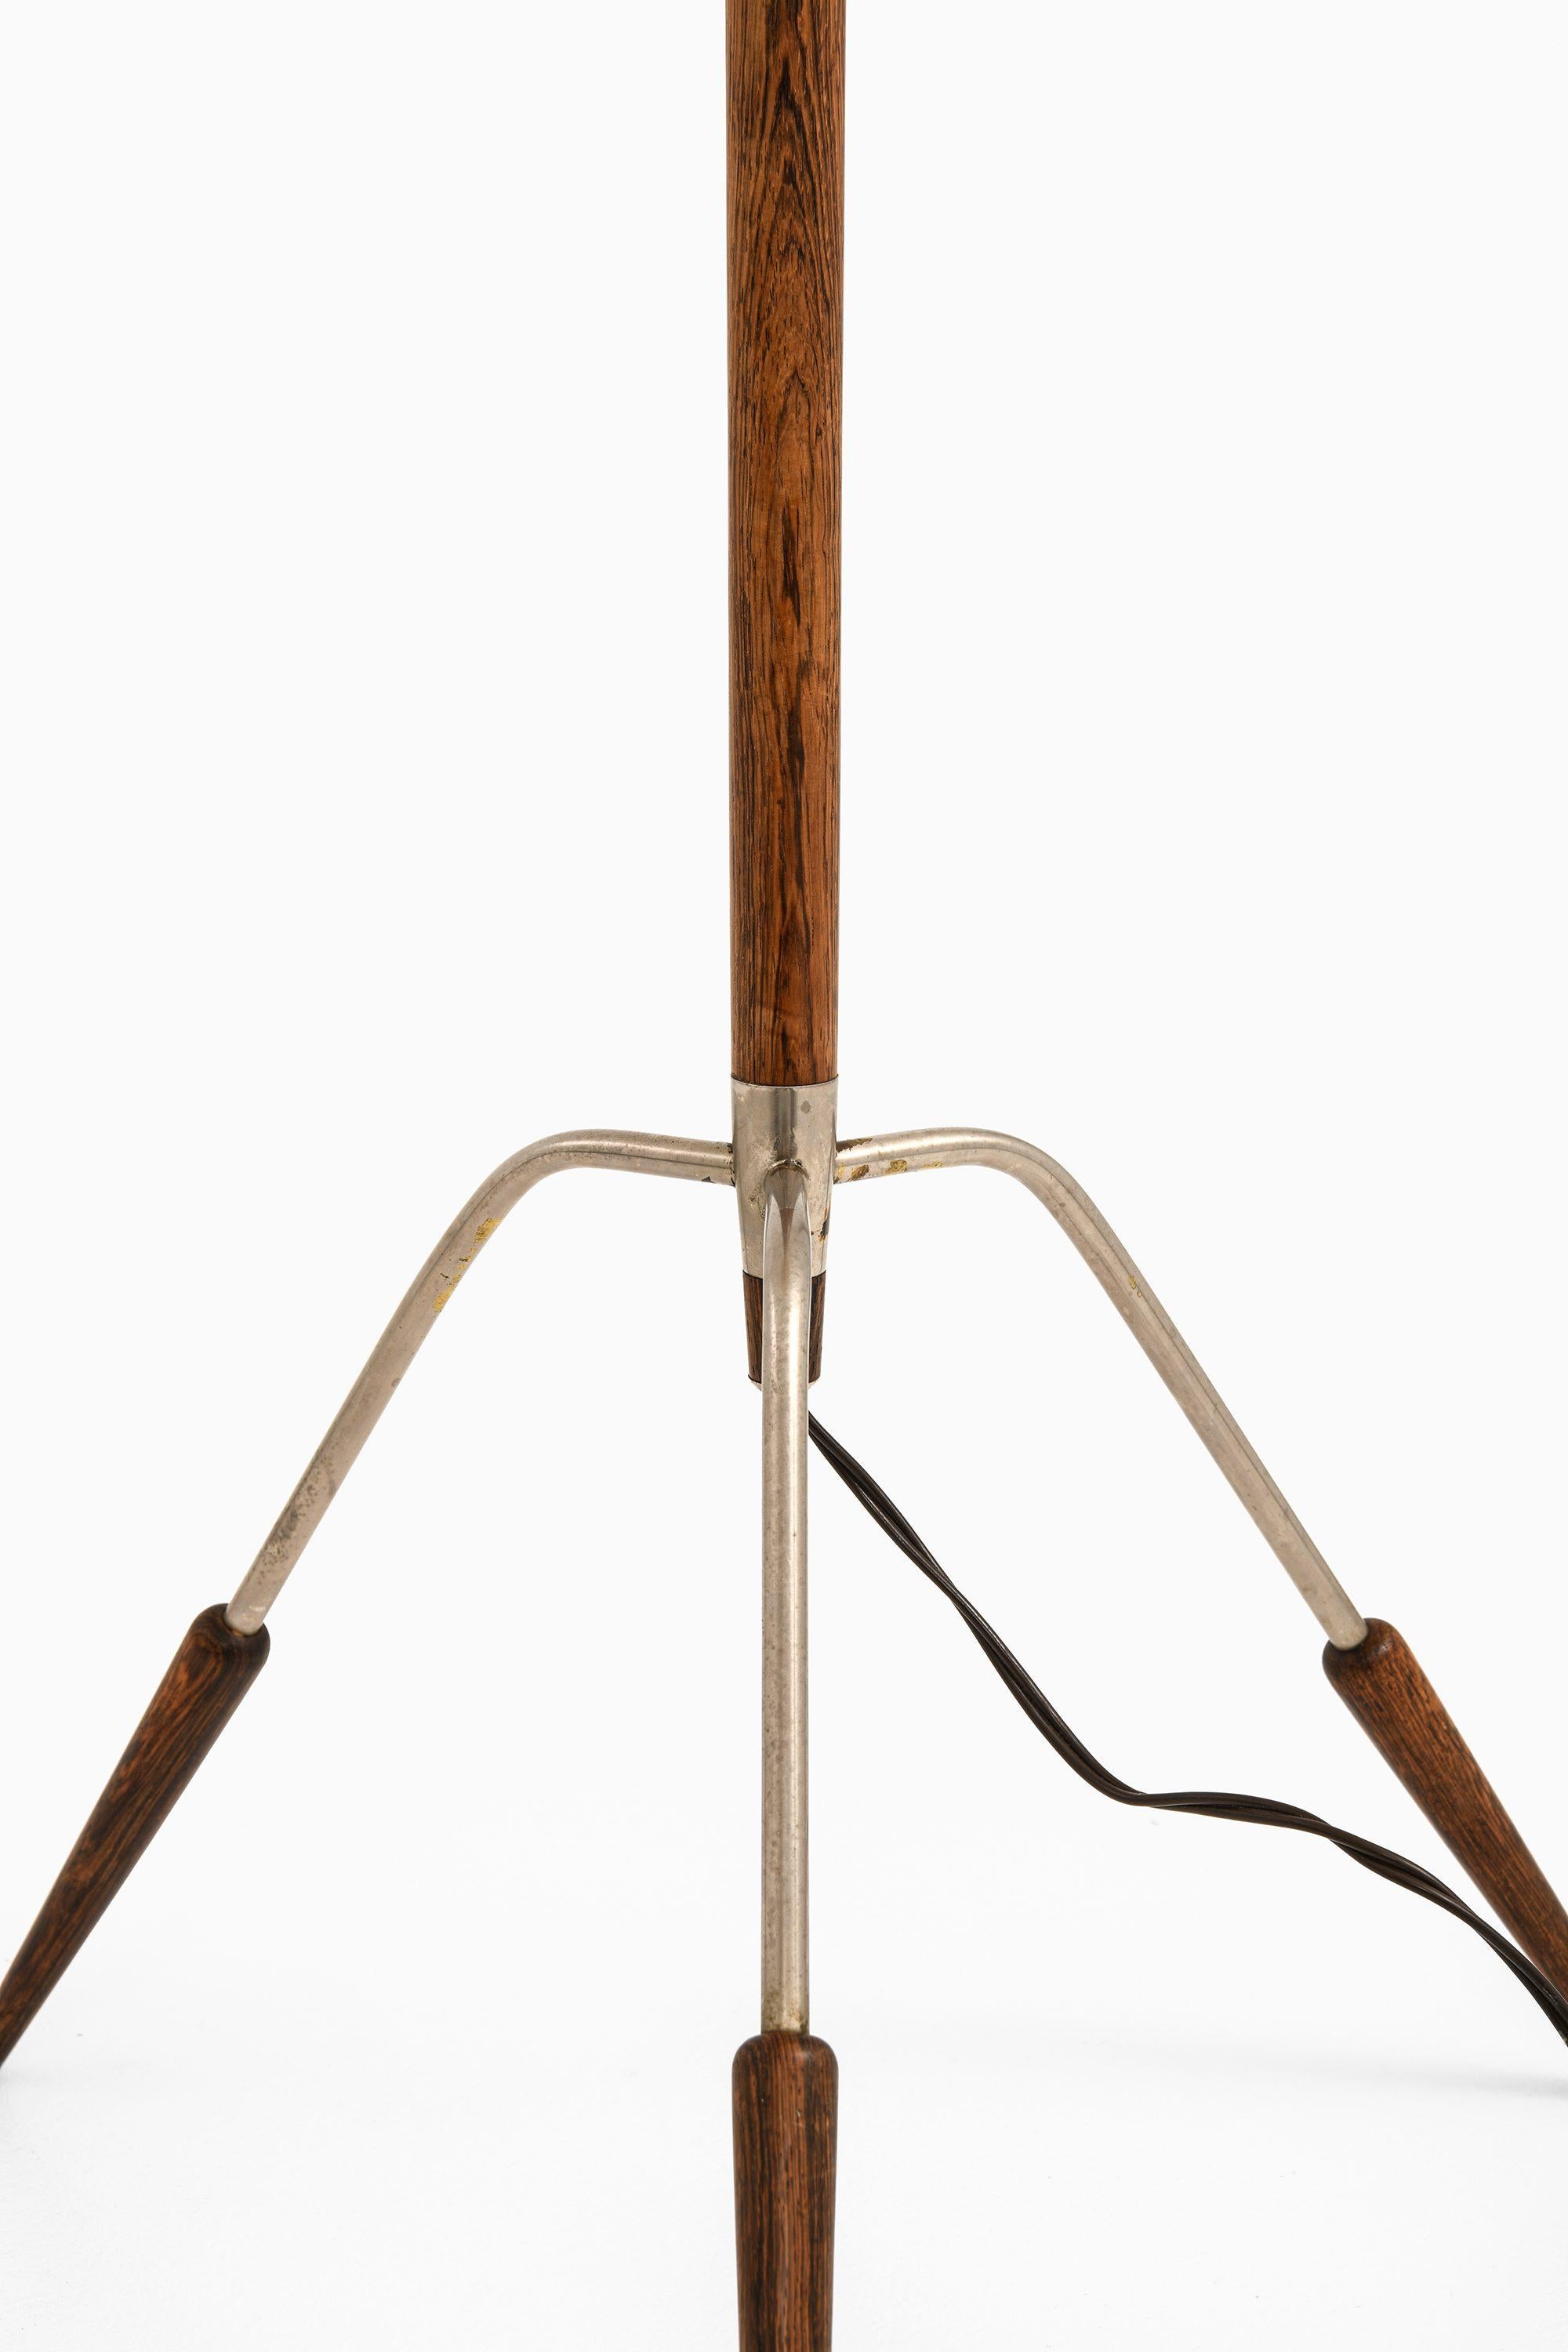 Danish Tripod Floor Lamp in Rosewood and Steel Attributed to Jo Hammerborg, 1960's For Sale